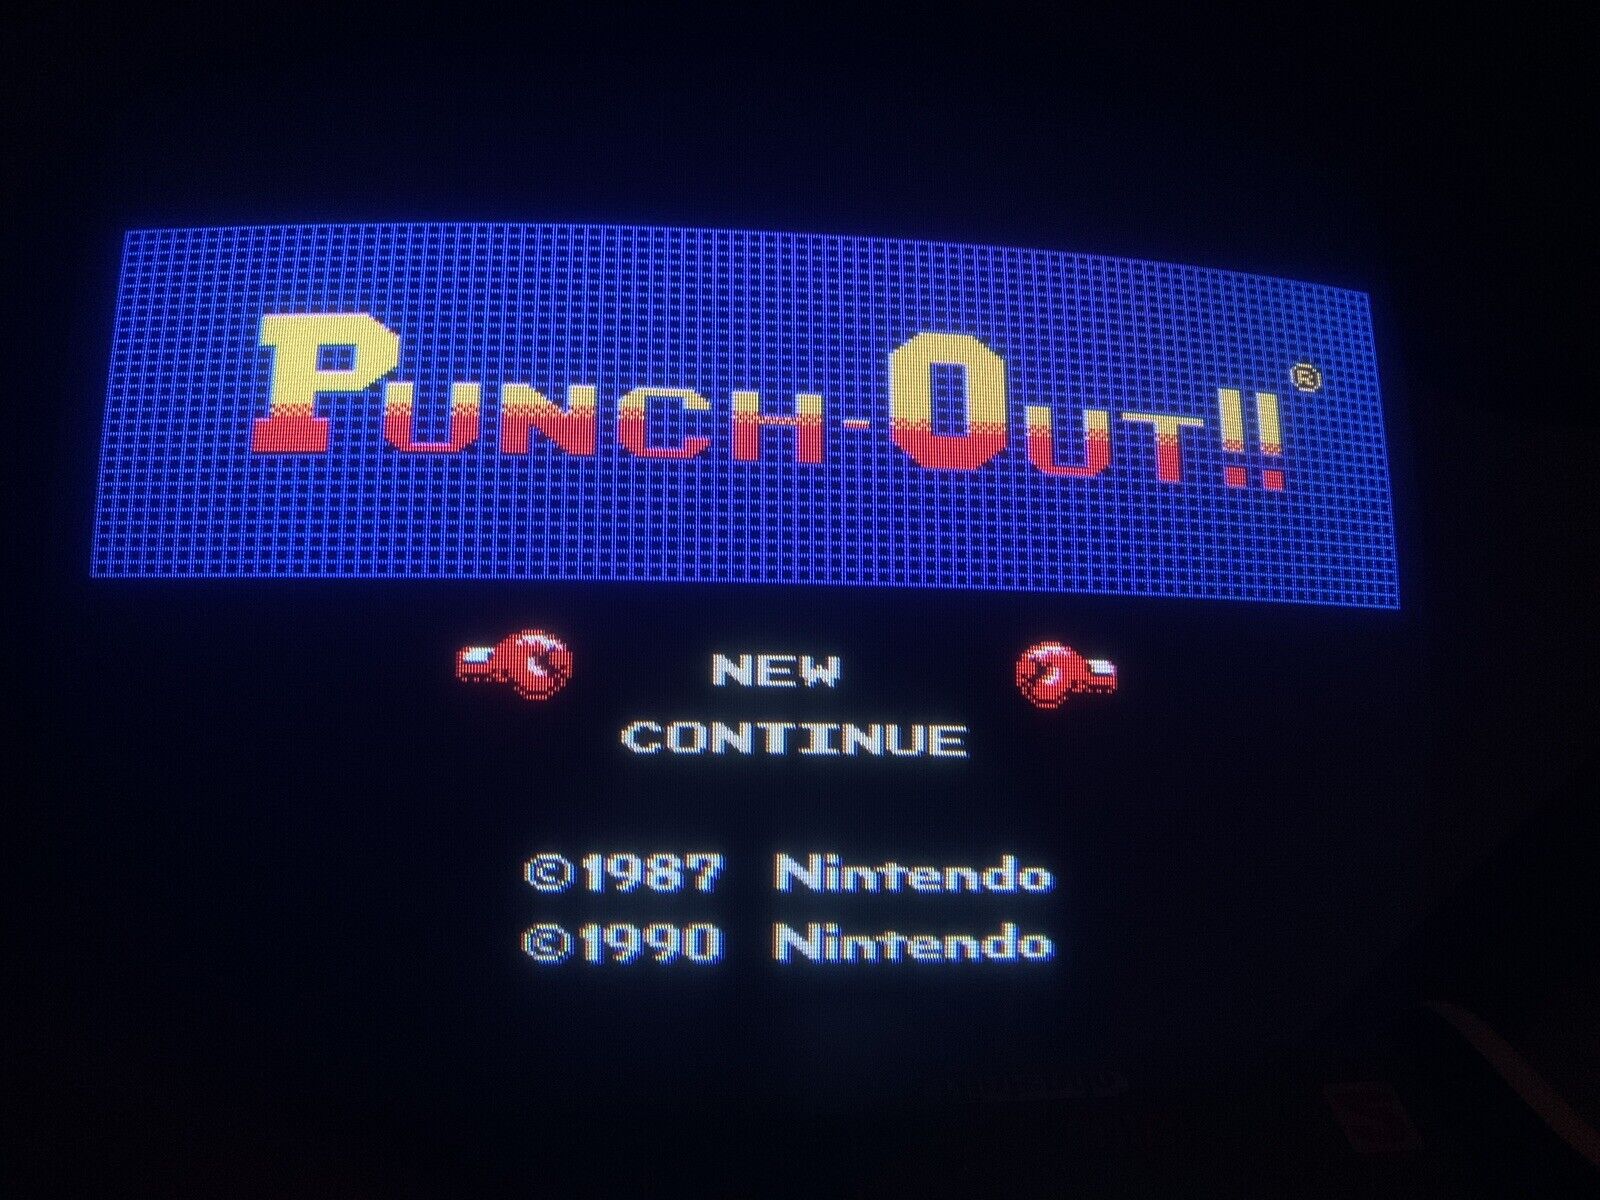 Nintendo Playchoice 10 Punch-out Cart Pc-10 Punch Out. Not Mike Tyson’s